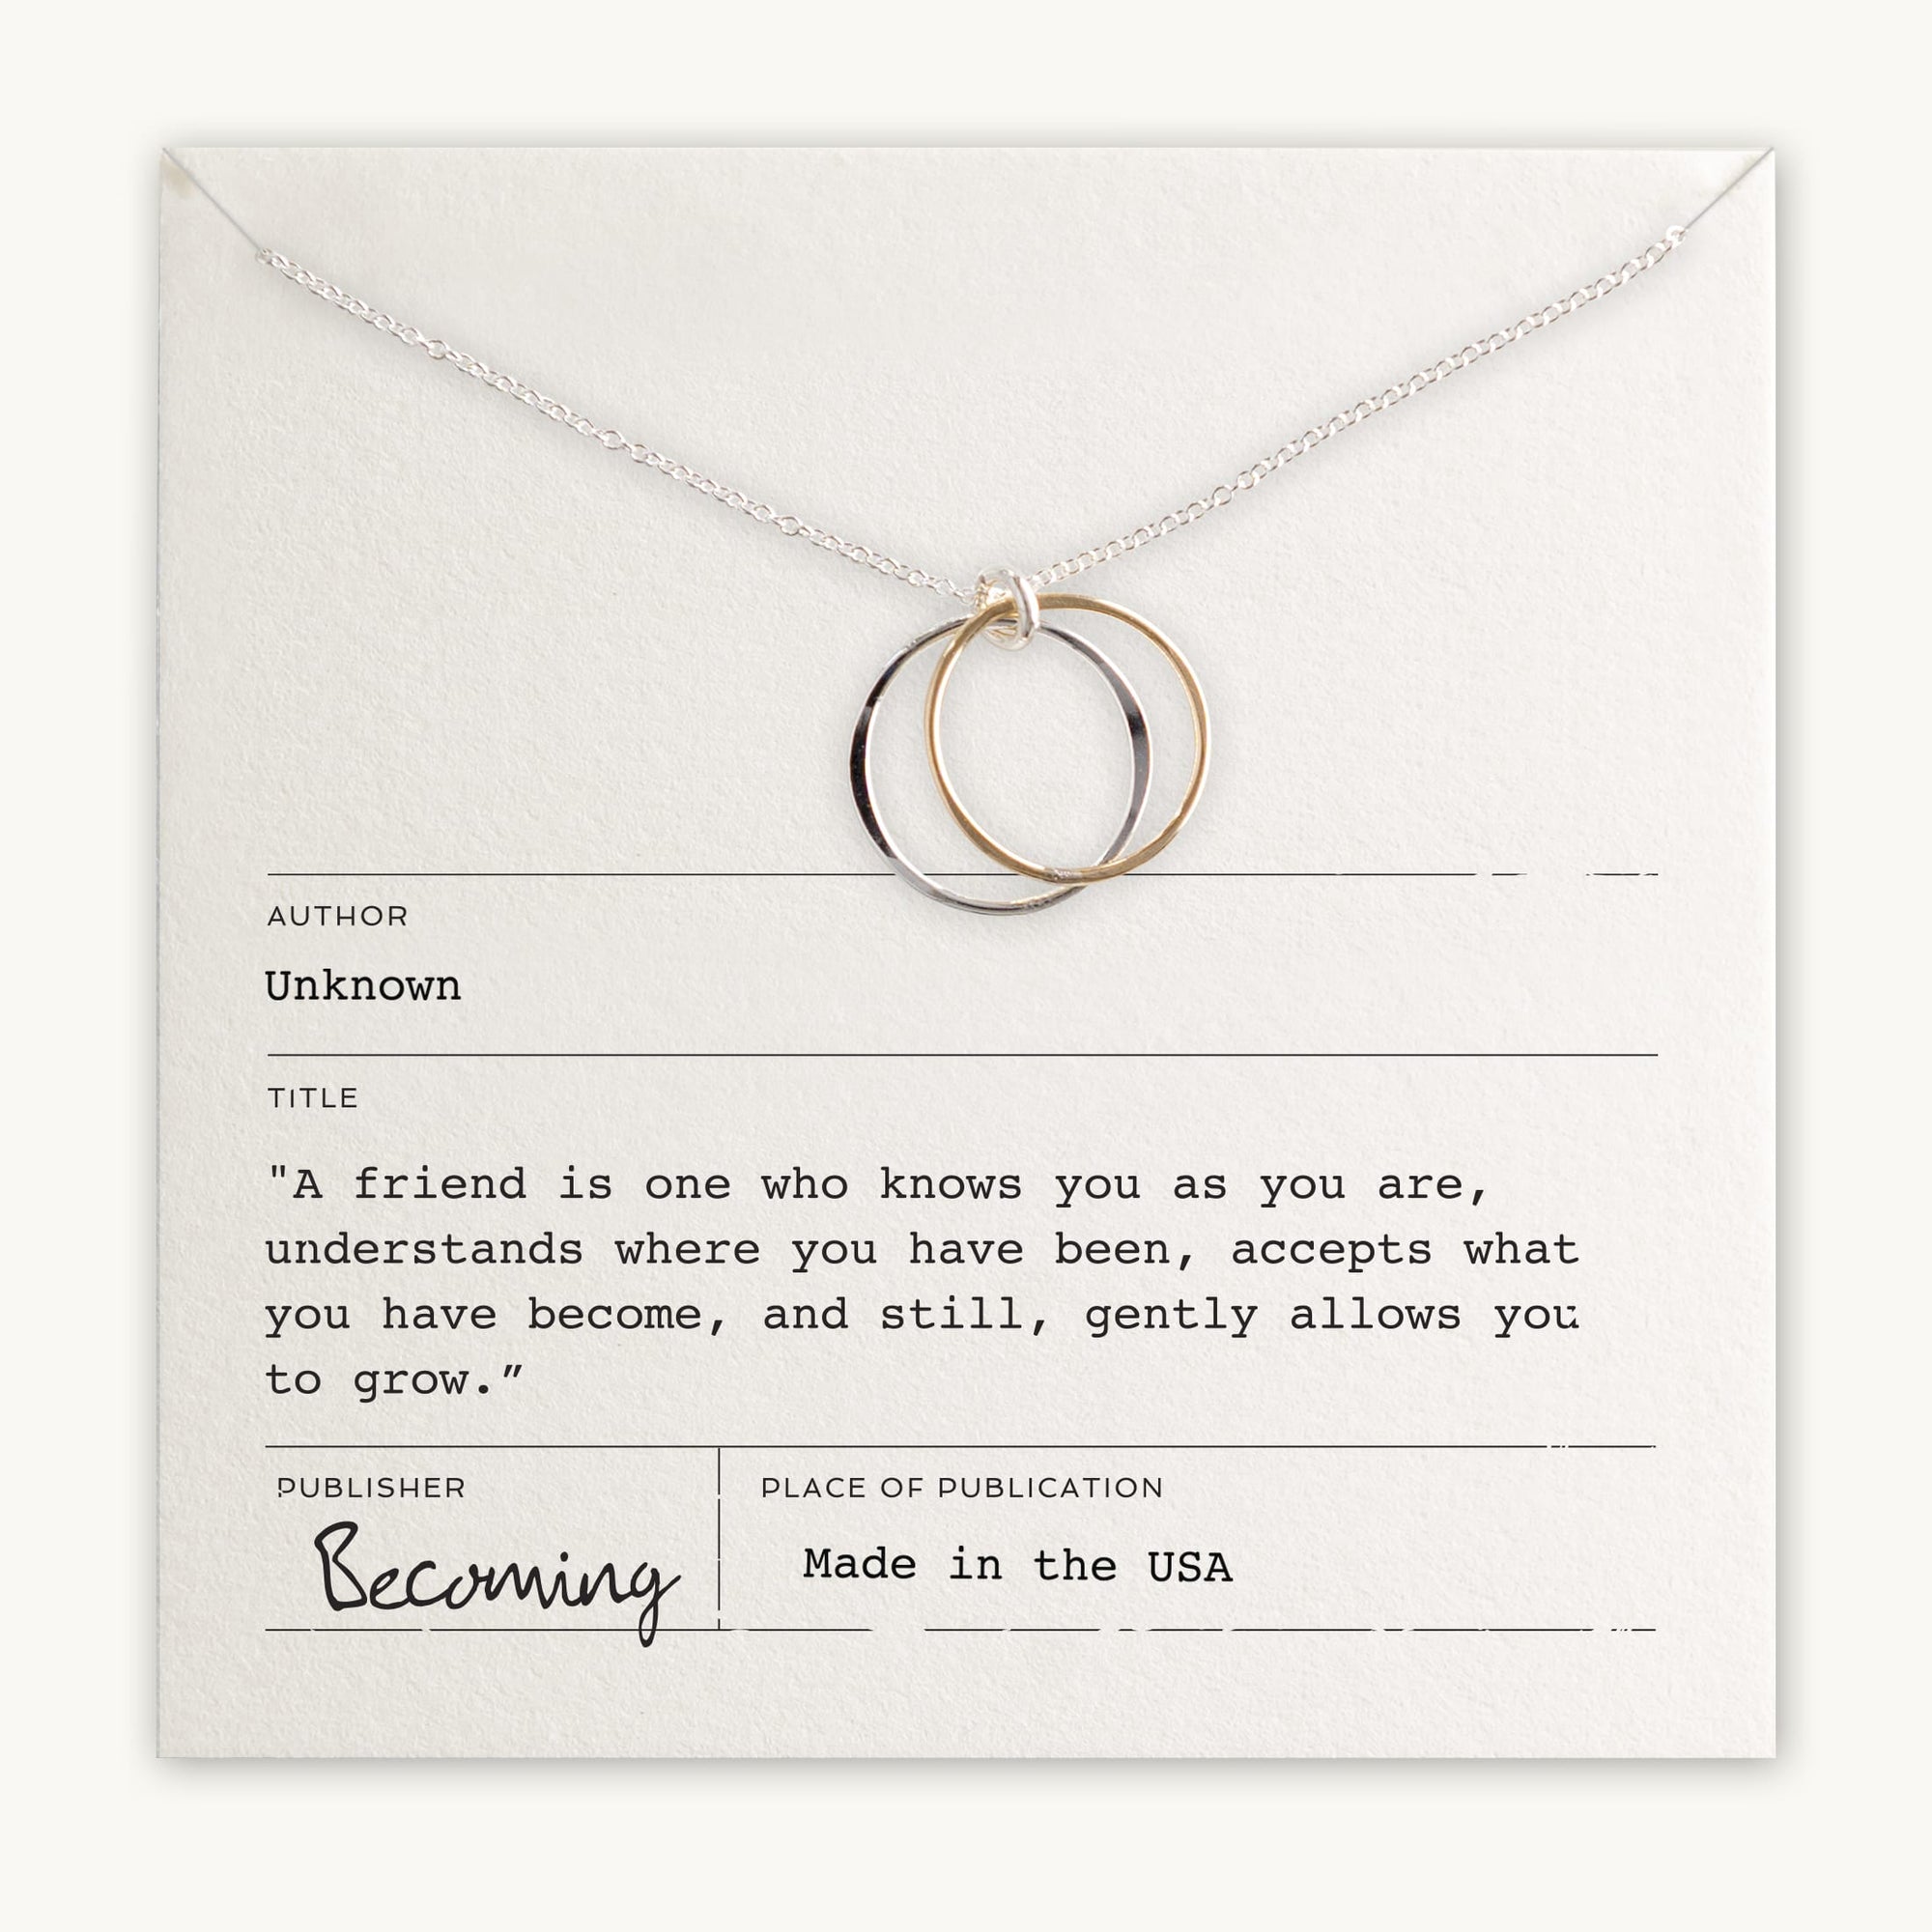 Becoming Jewelry&#39;s Friendship Circles Necklace with intertwined circles on a message card with an inspirational quote about friendship.